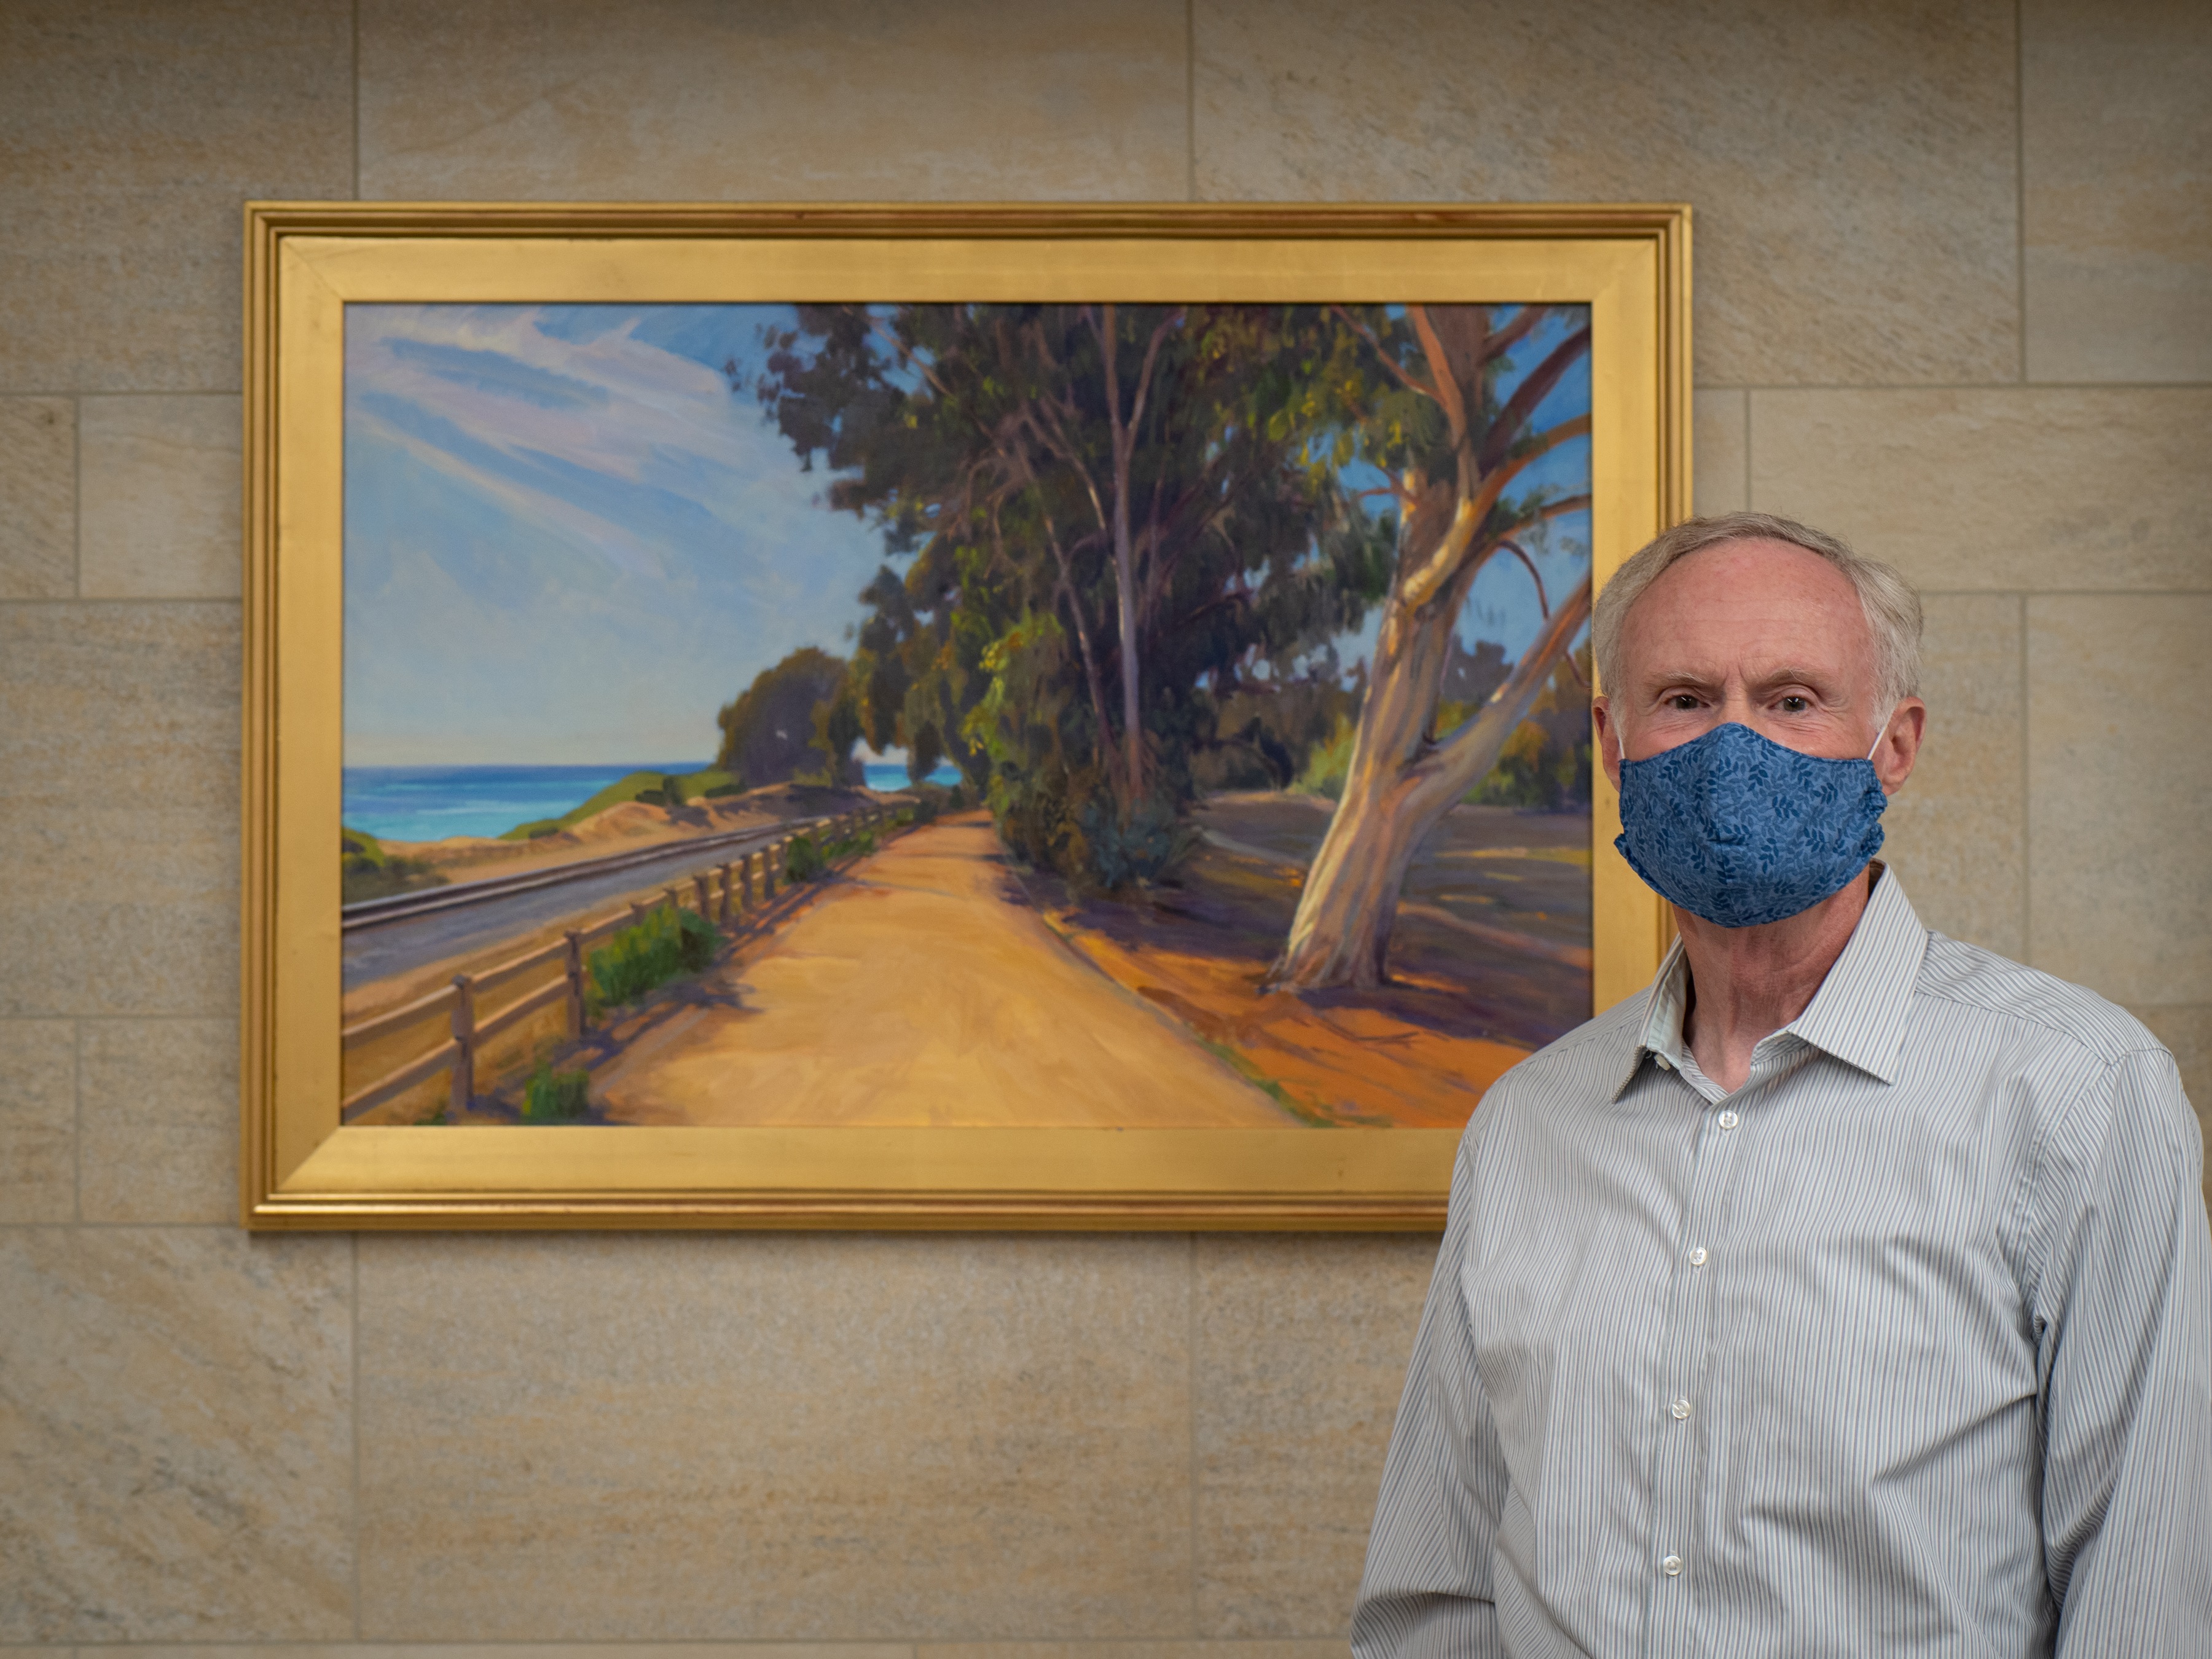 Patient Michael Miller in front of a painting